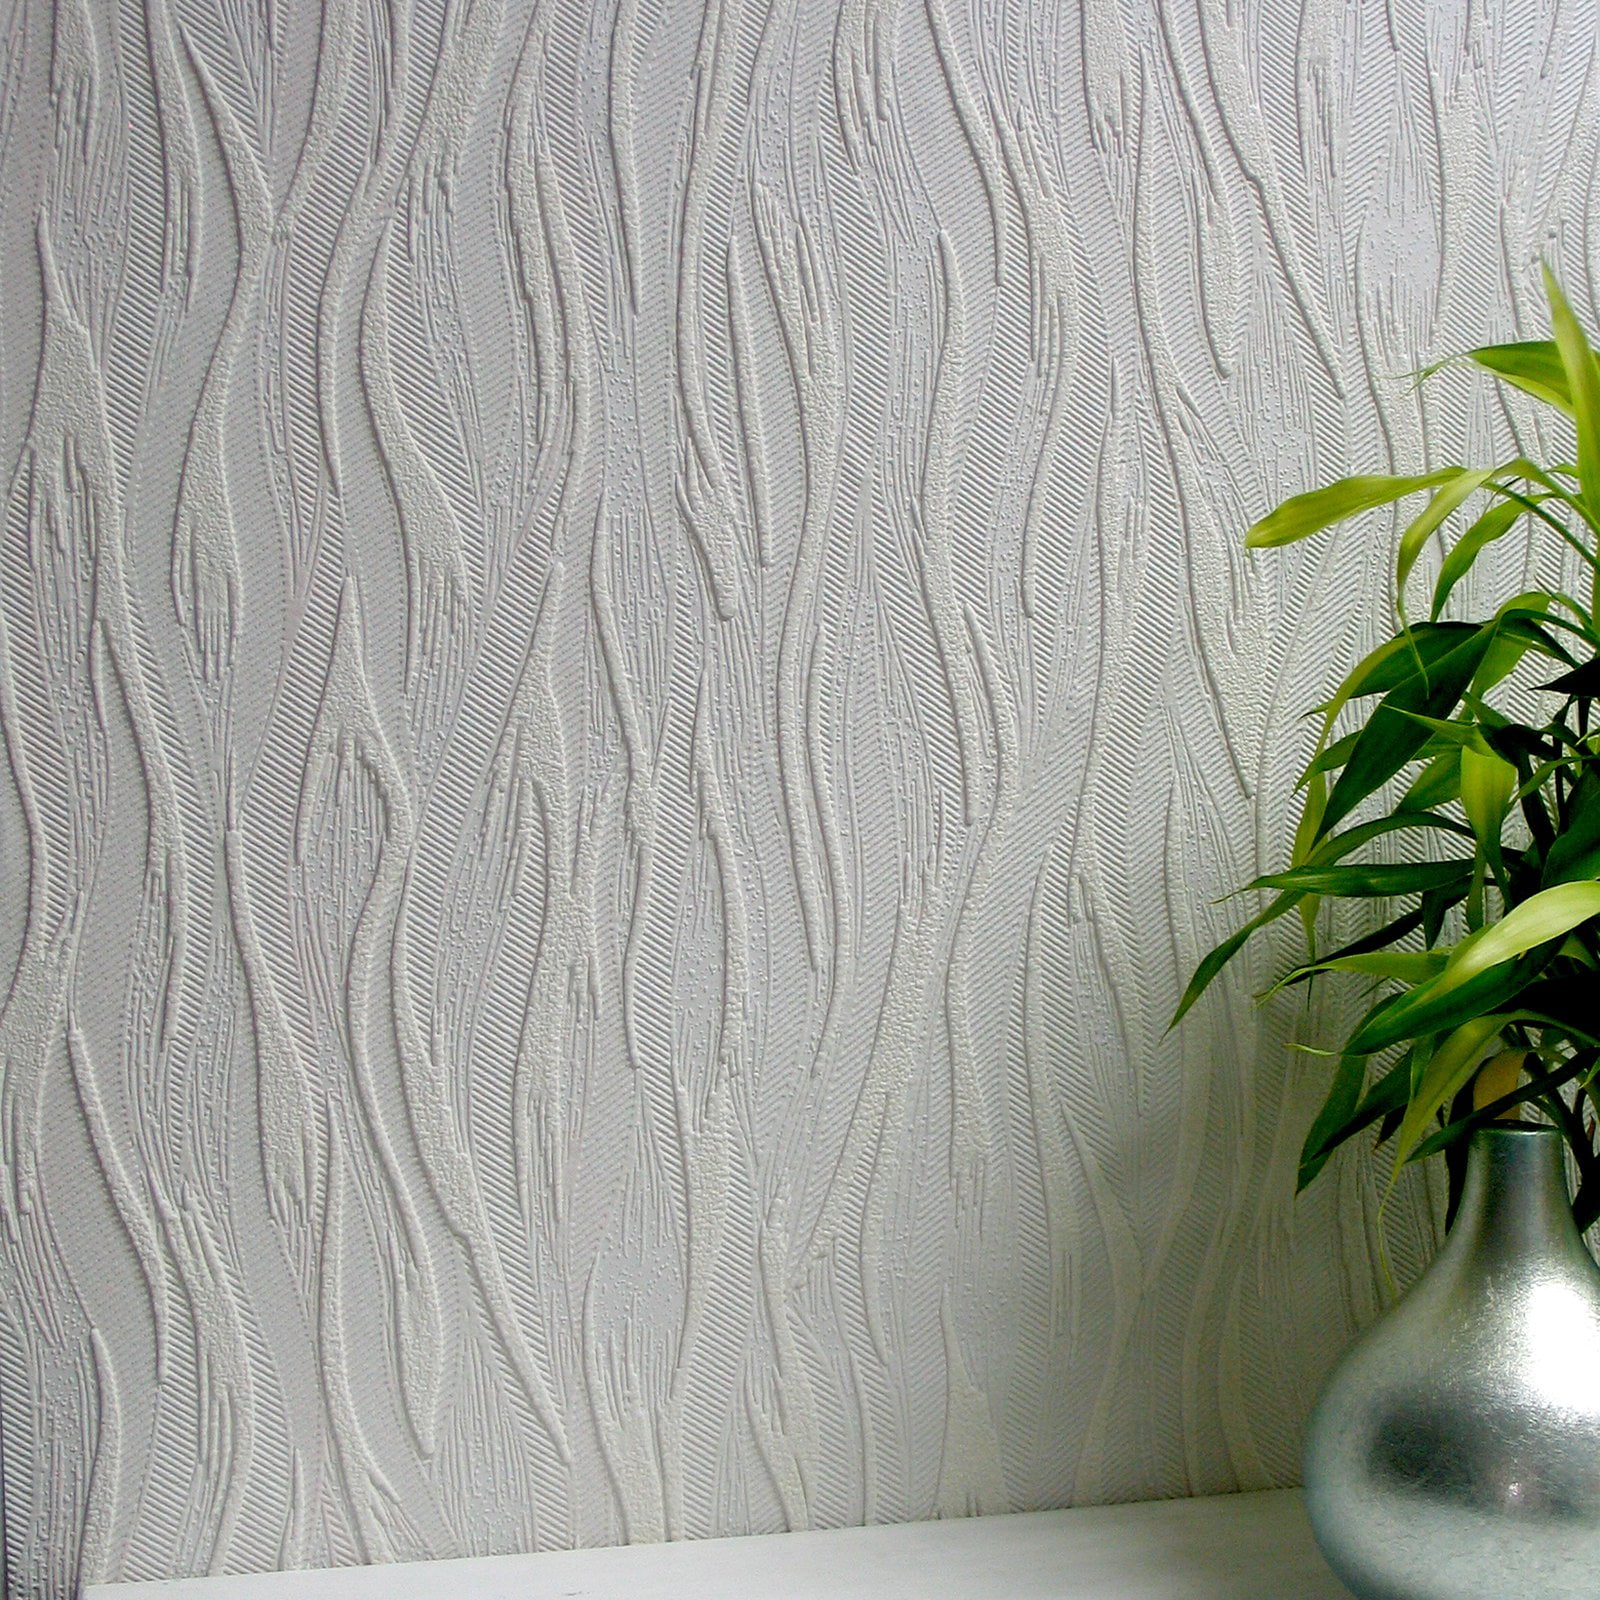 White textured wallpaper White seamless textured wallpaper background   CanStock